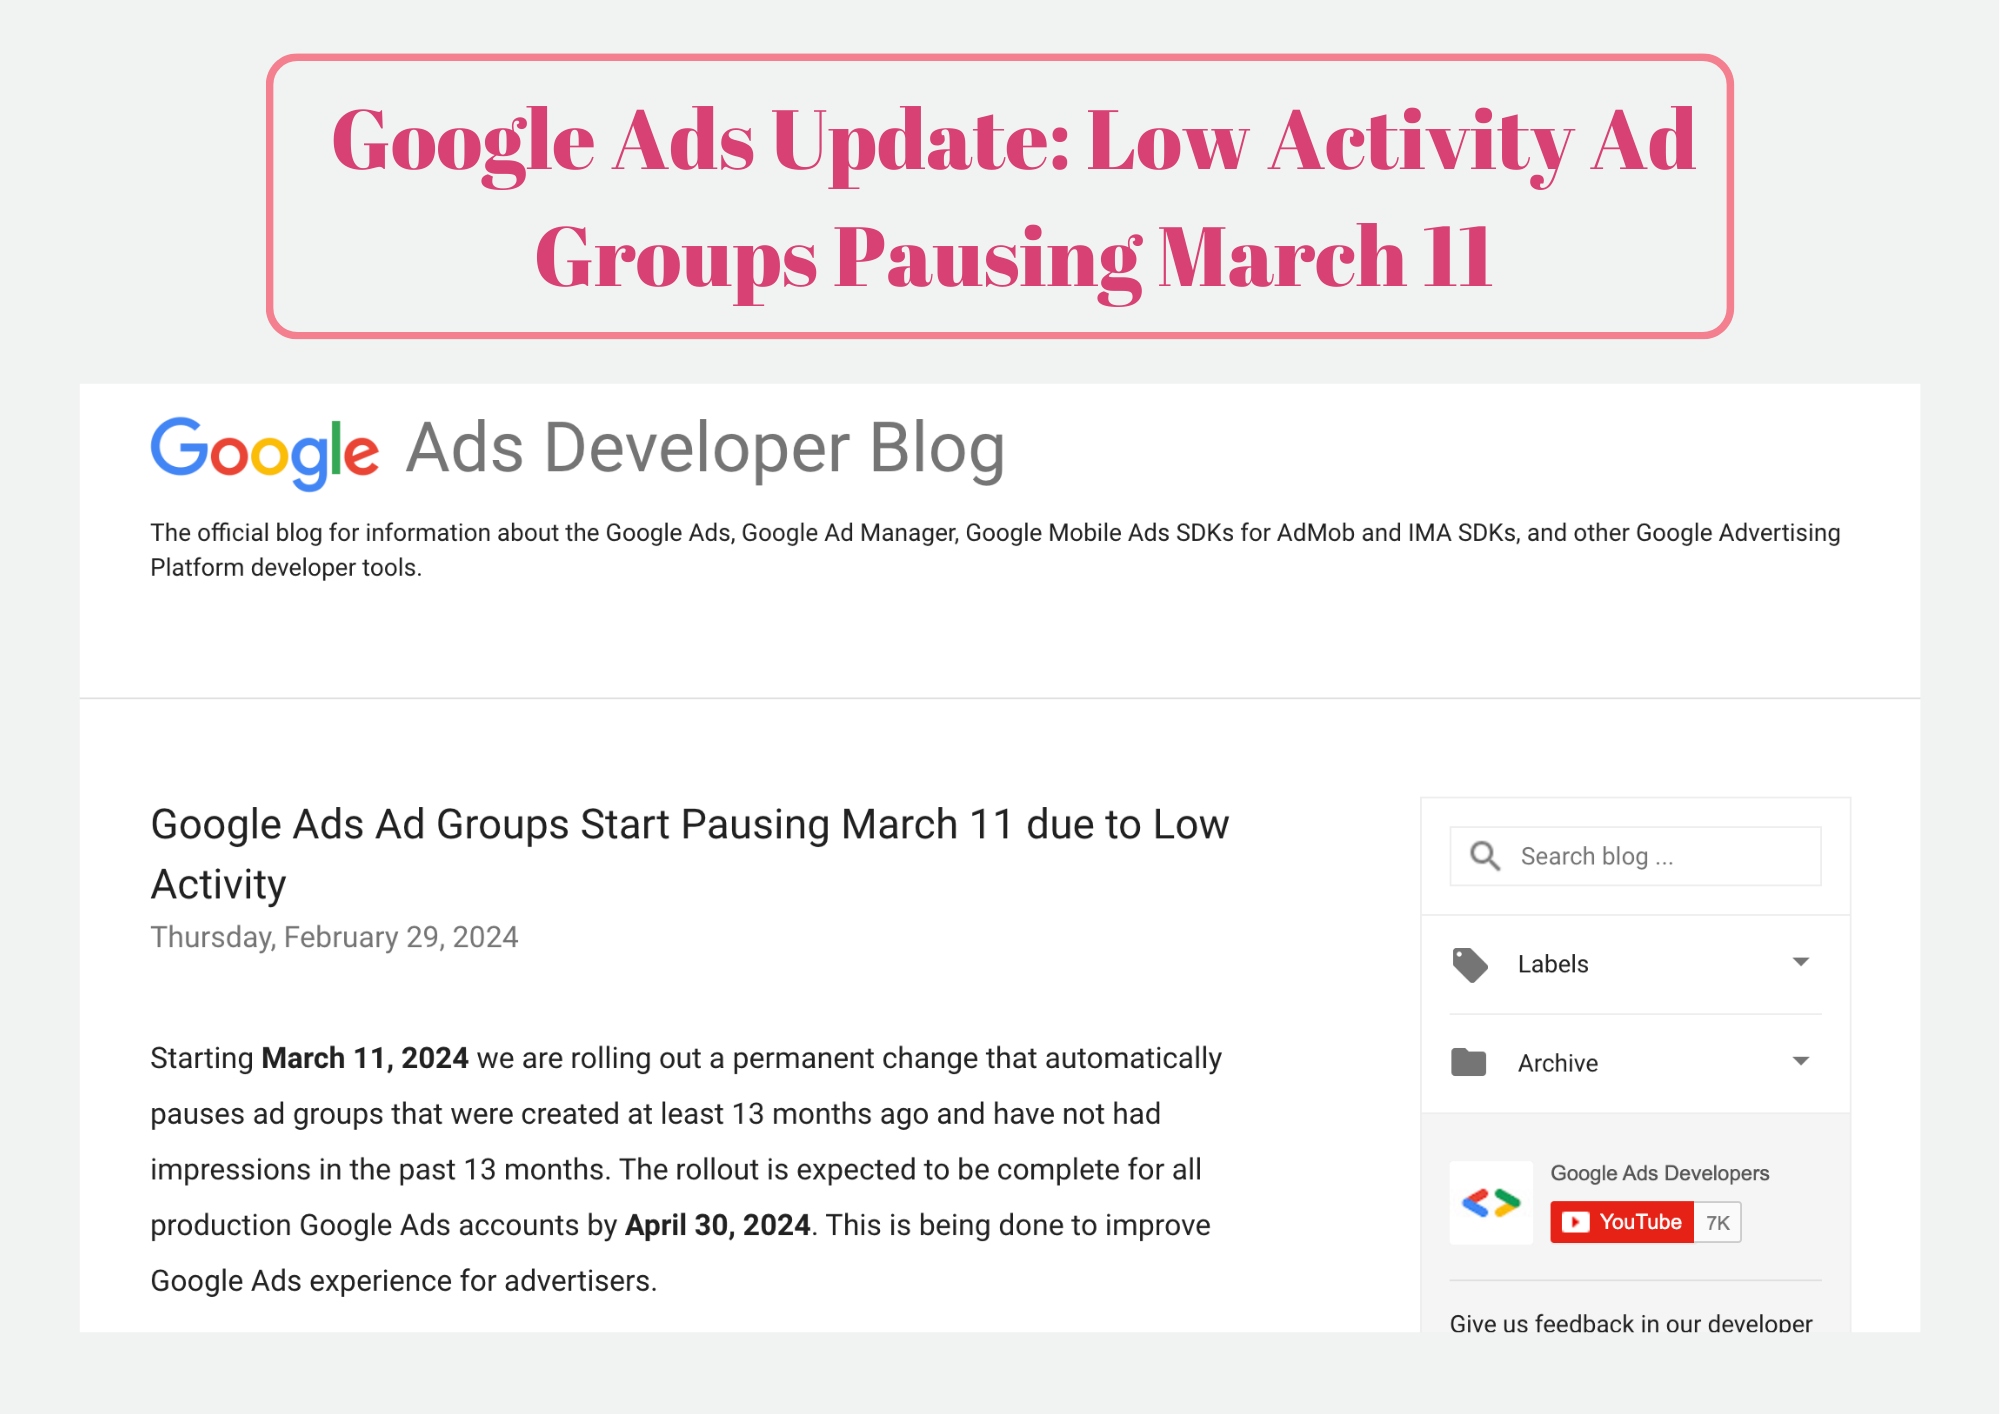 Google Ads Update Low Activity Ad Groups Pausing March 11